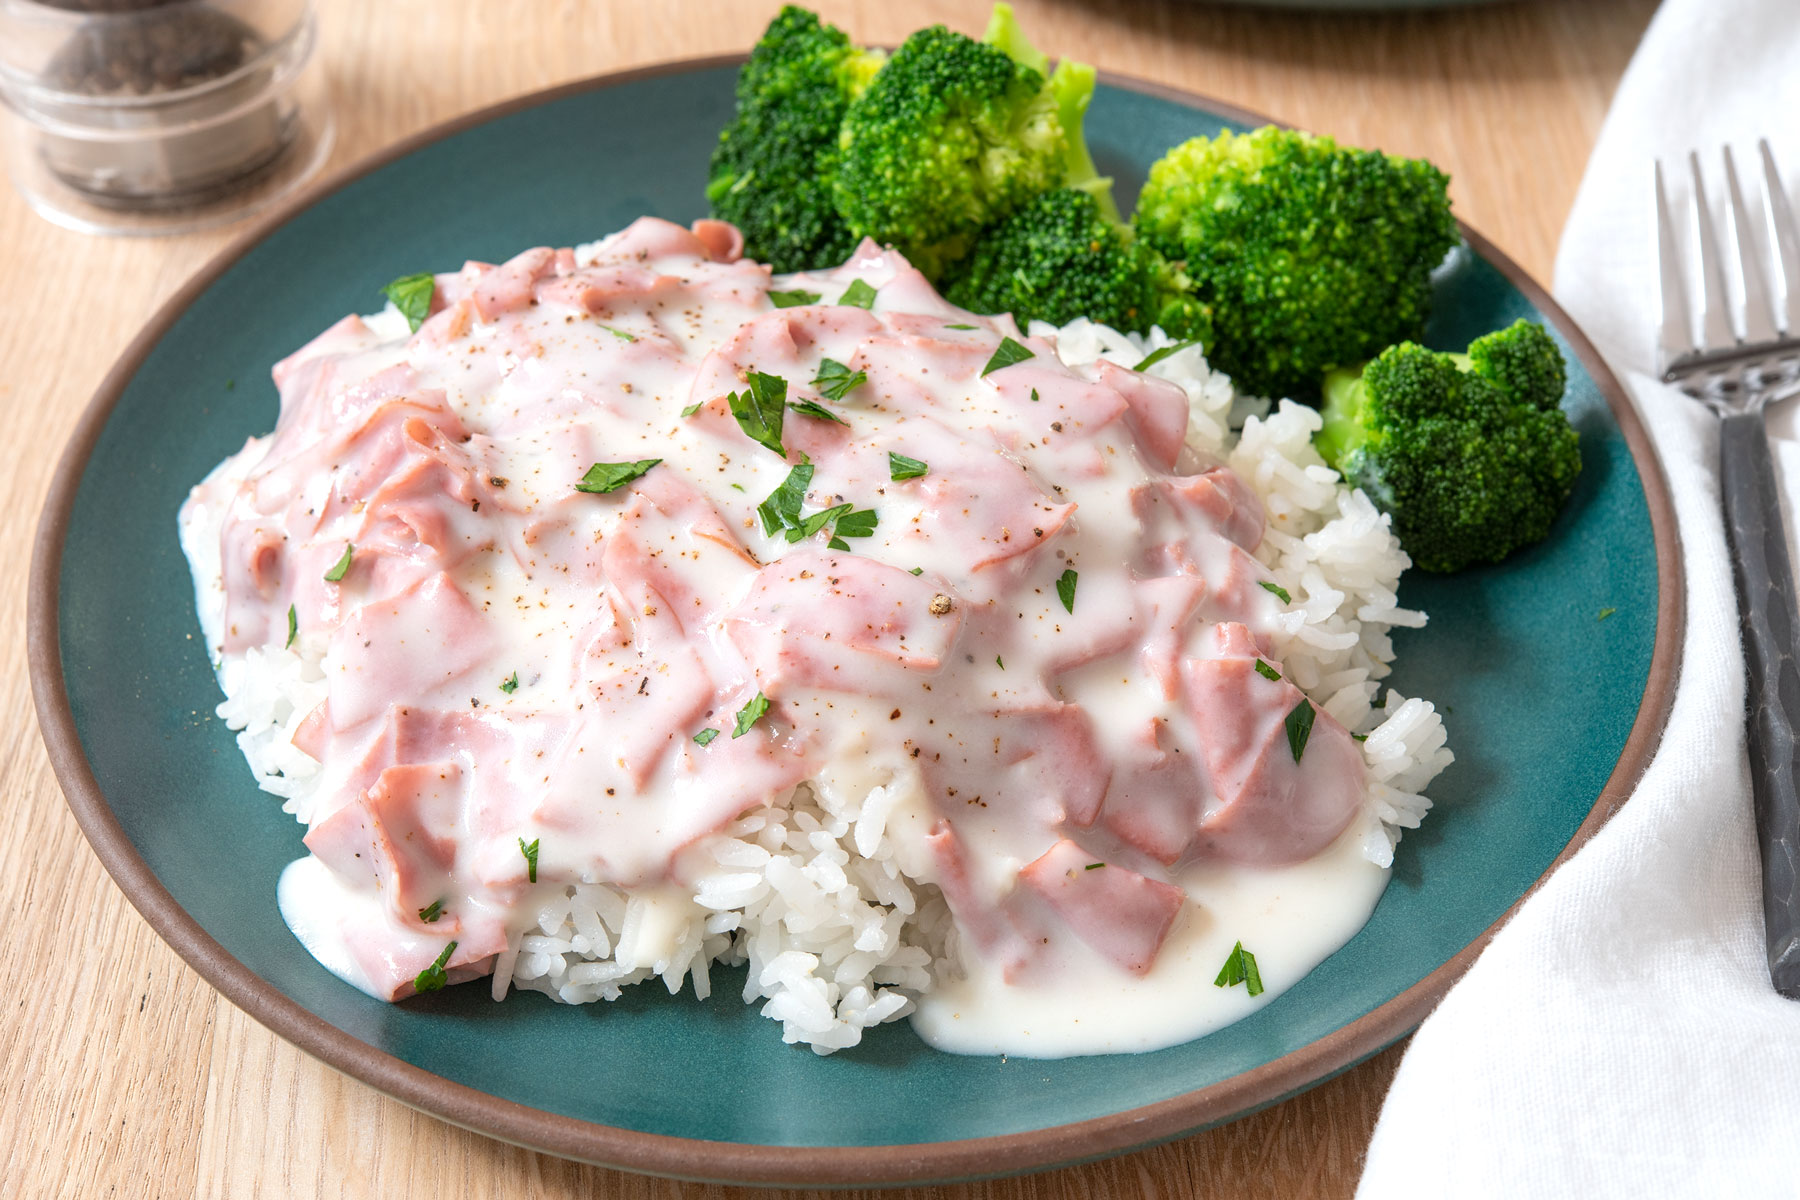 Plate of chipped beef over rice with steamed broccoli.